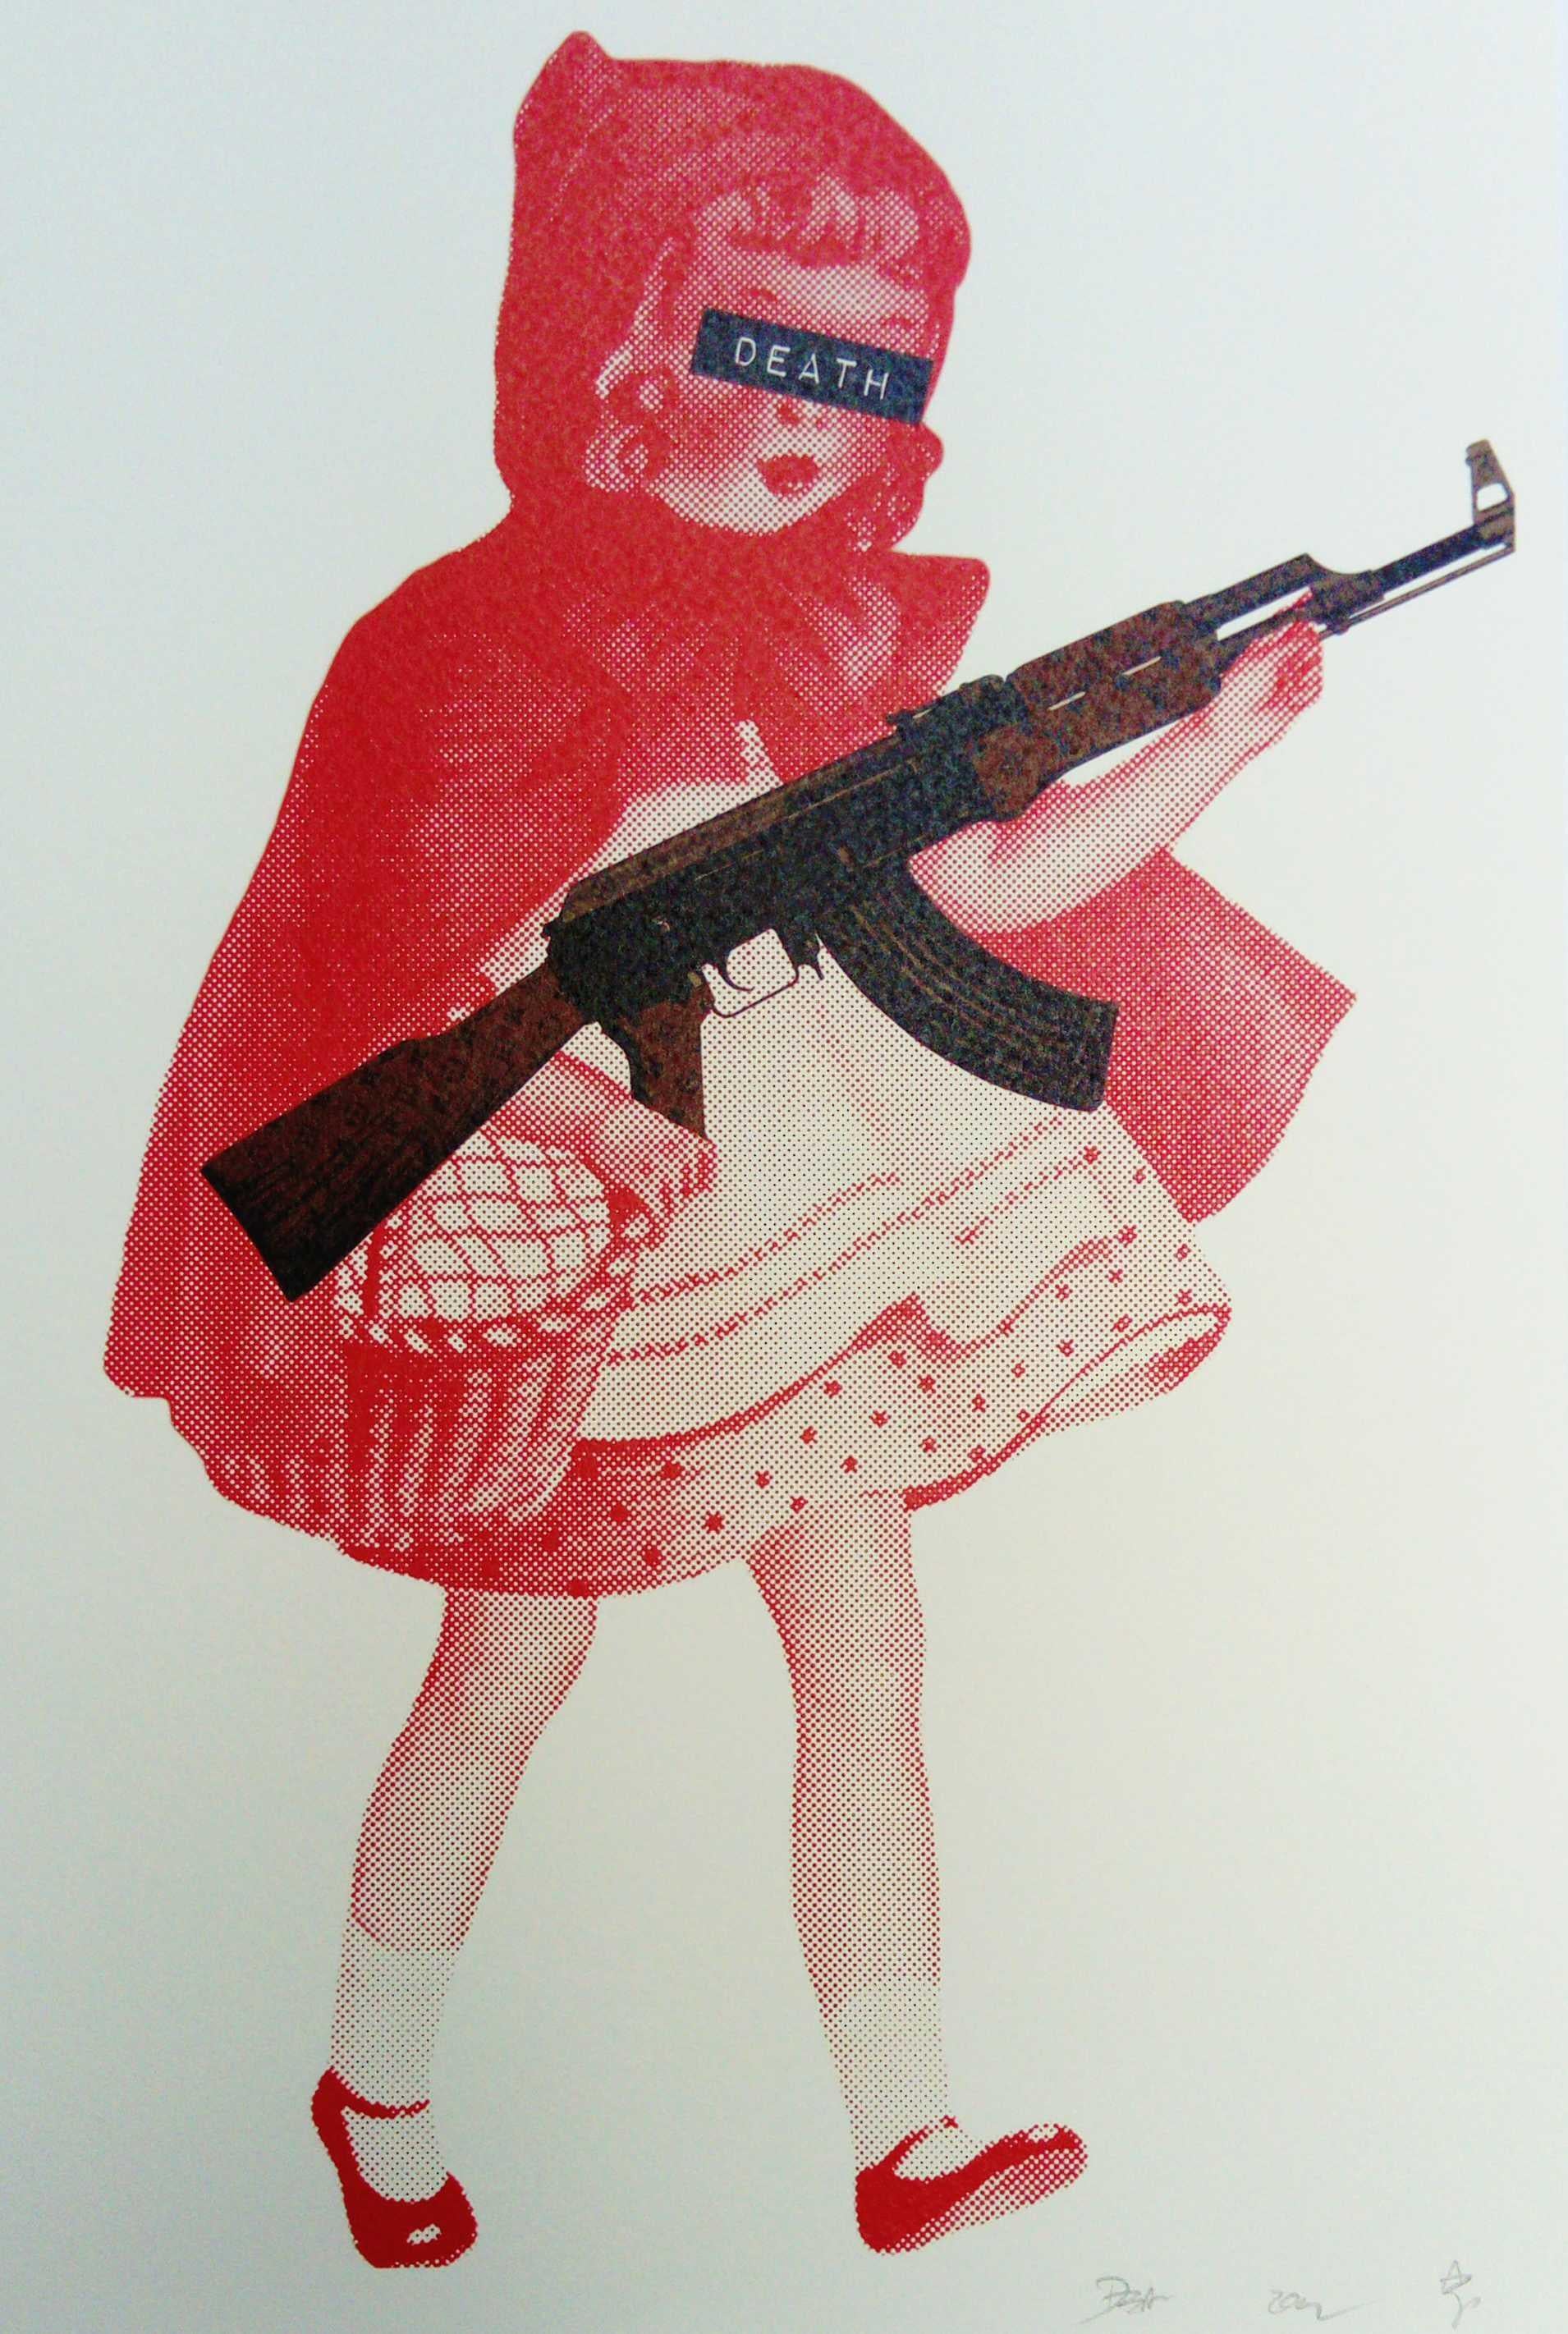 Death NYC Figurative Print - Little Red Riding Hood with Gun